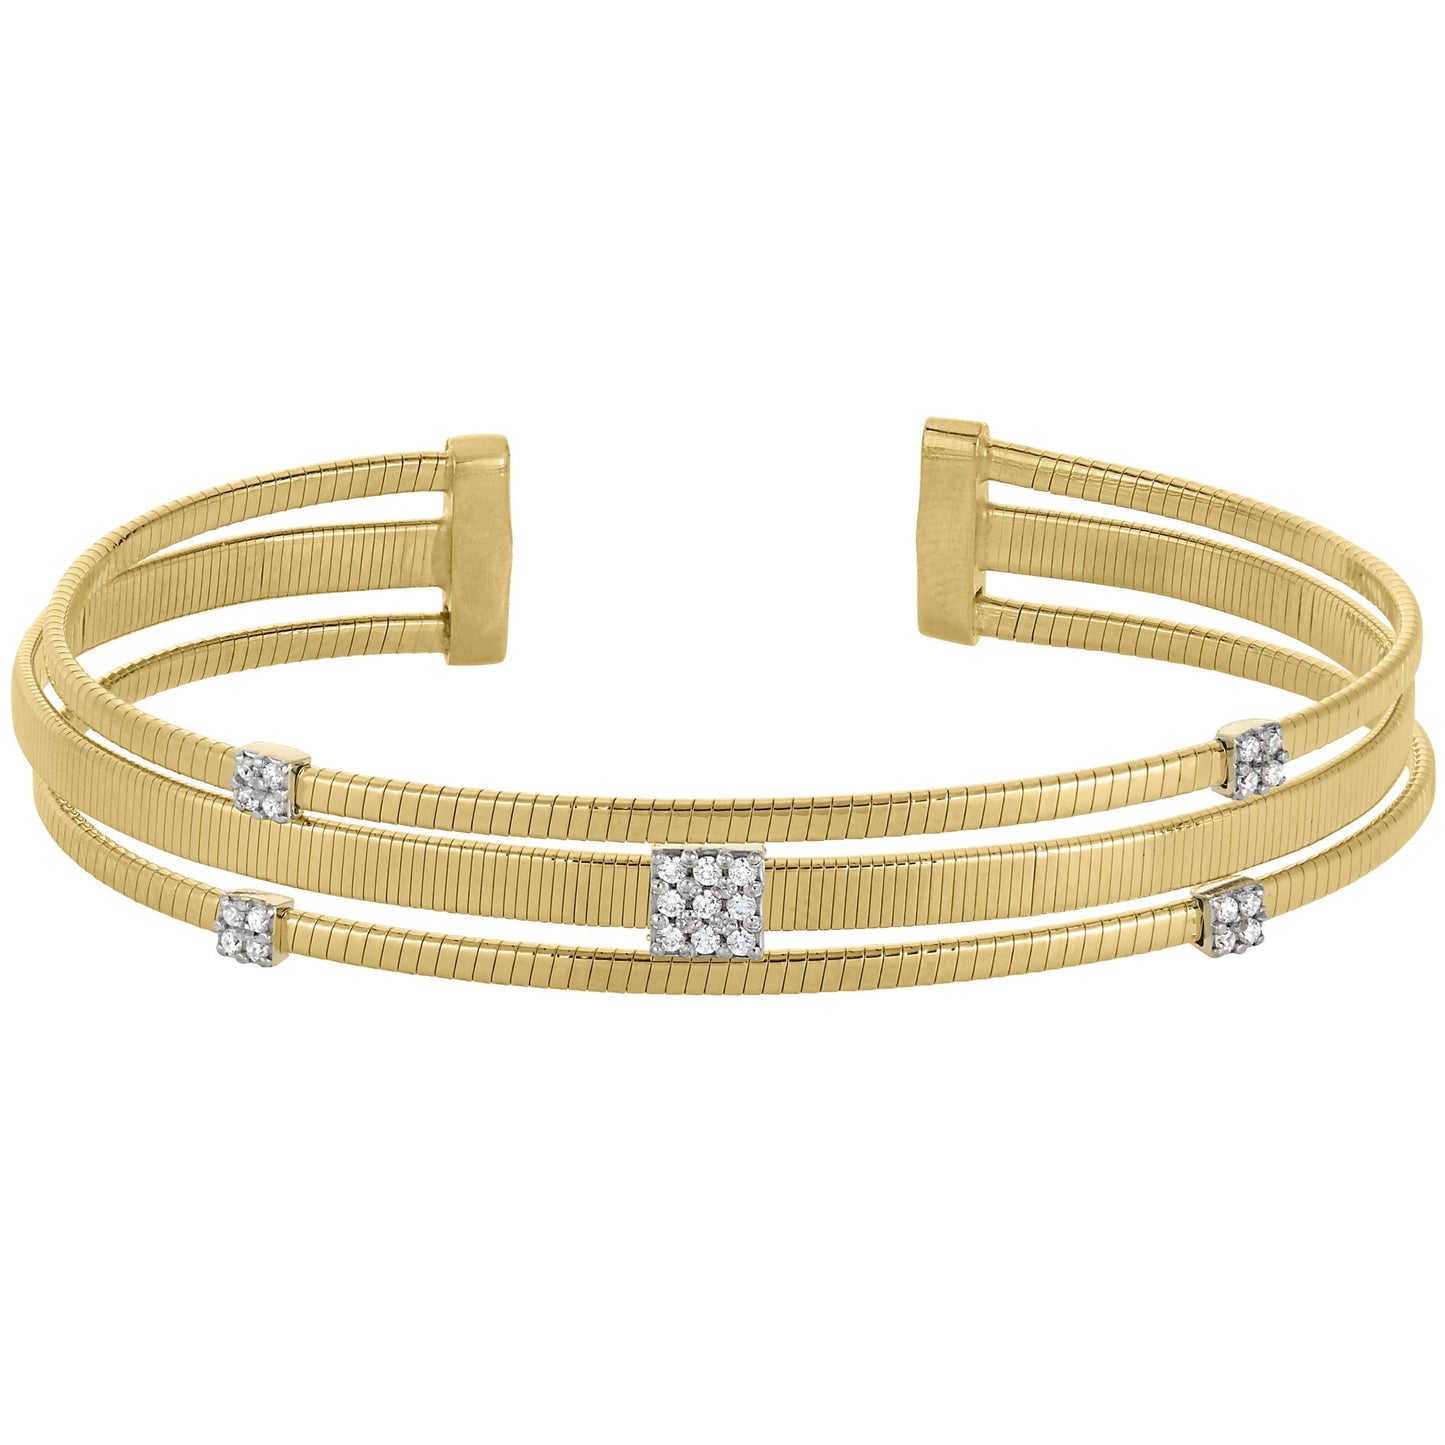 A three strand cable bracelet with simulated diamond square accents displayed on a neutral white background.